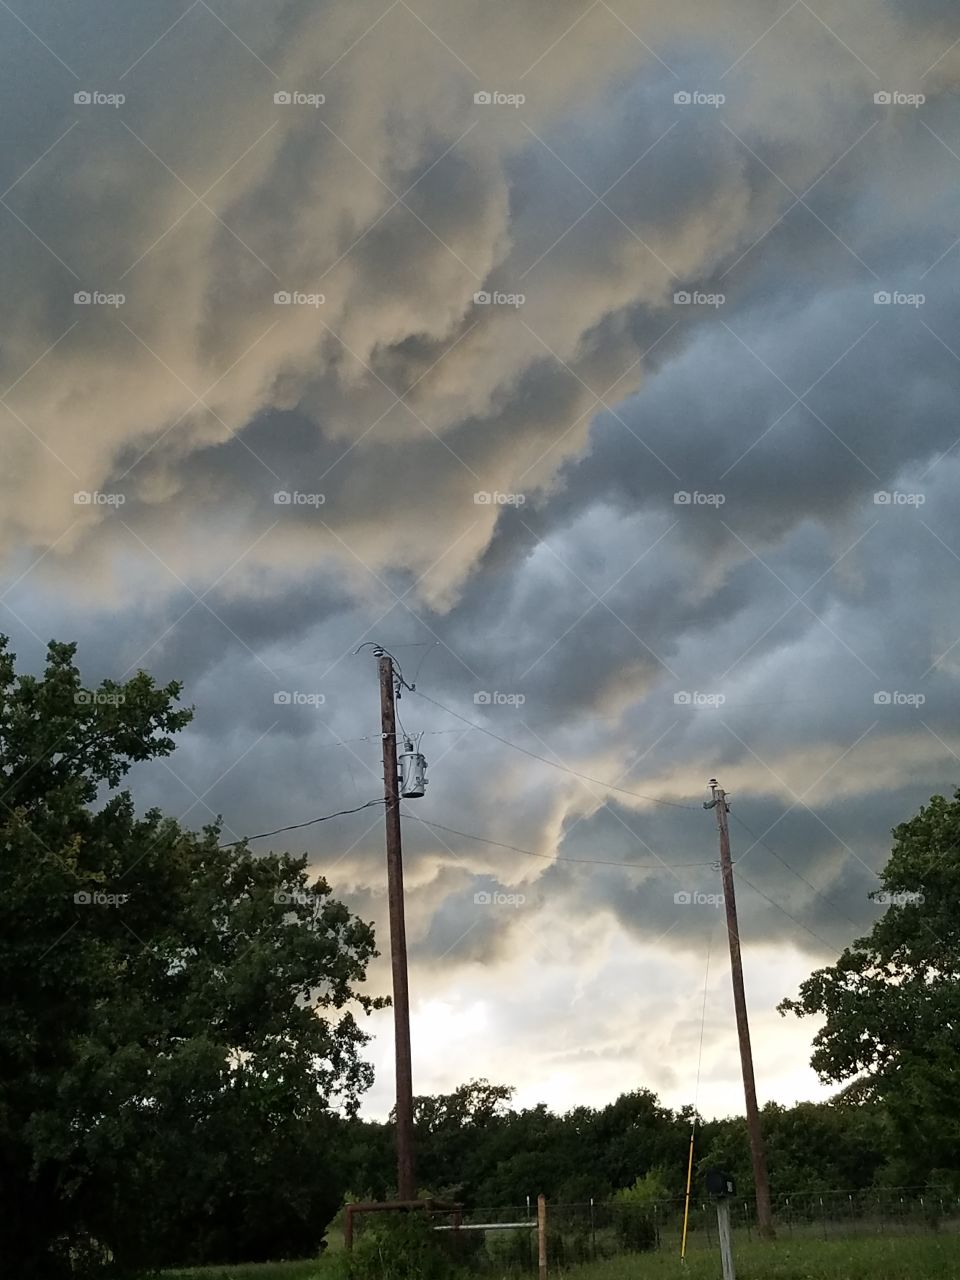 Thunderstorms rolling in.  I love storms  !